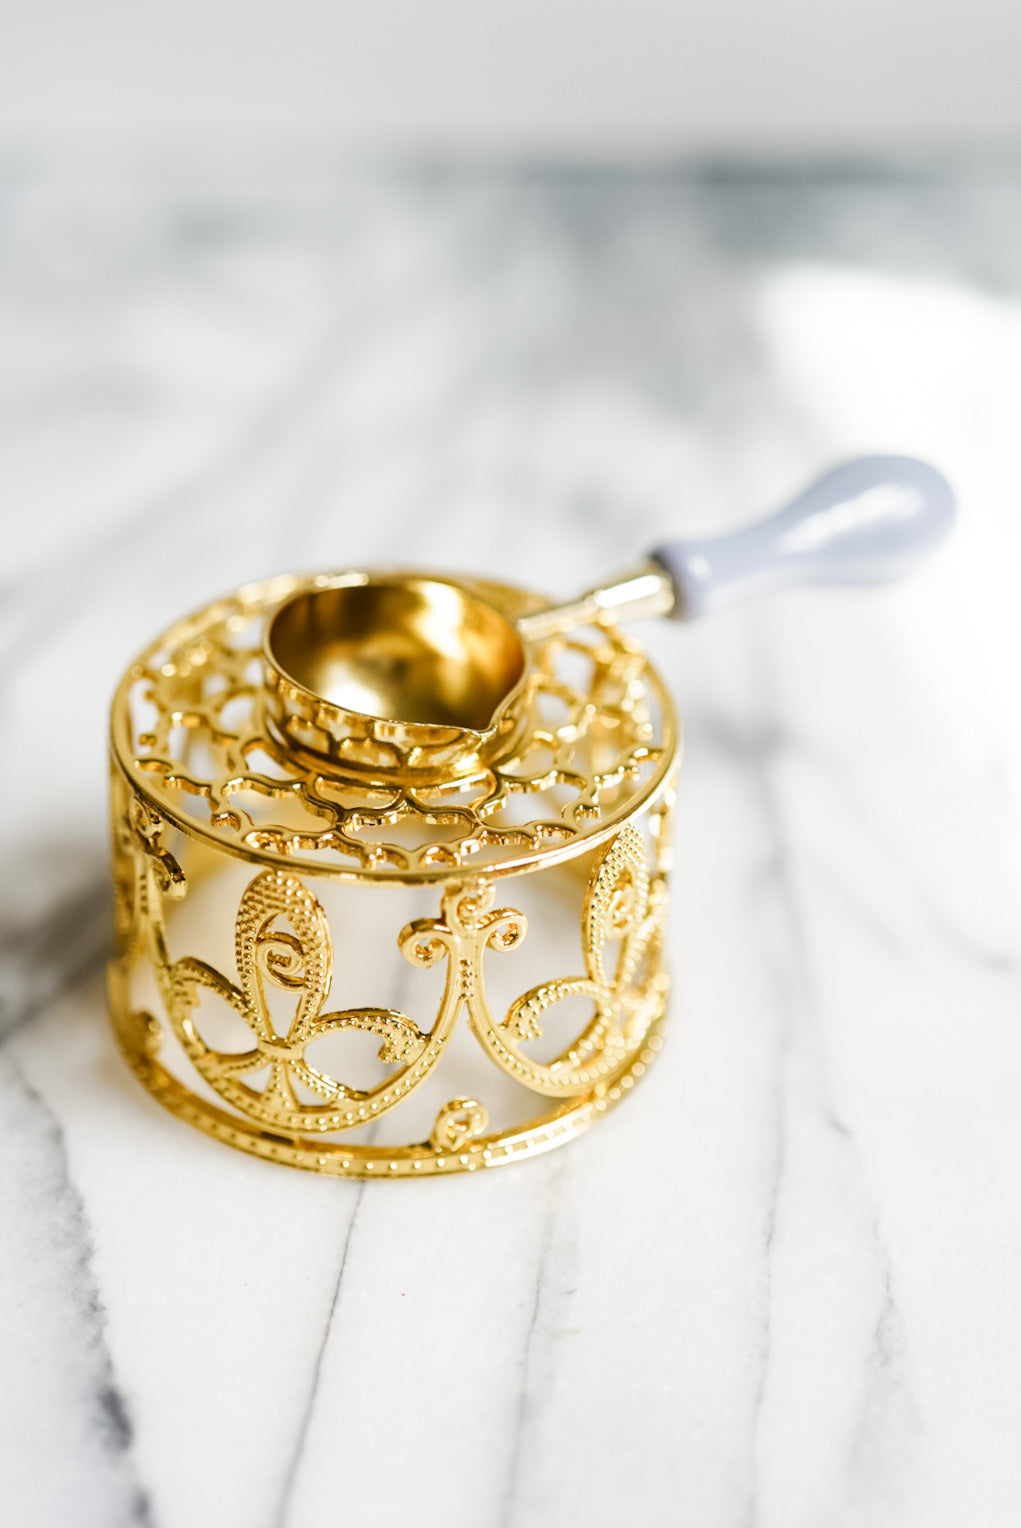 Ornate Gold Melter & Spoon